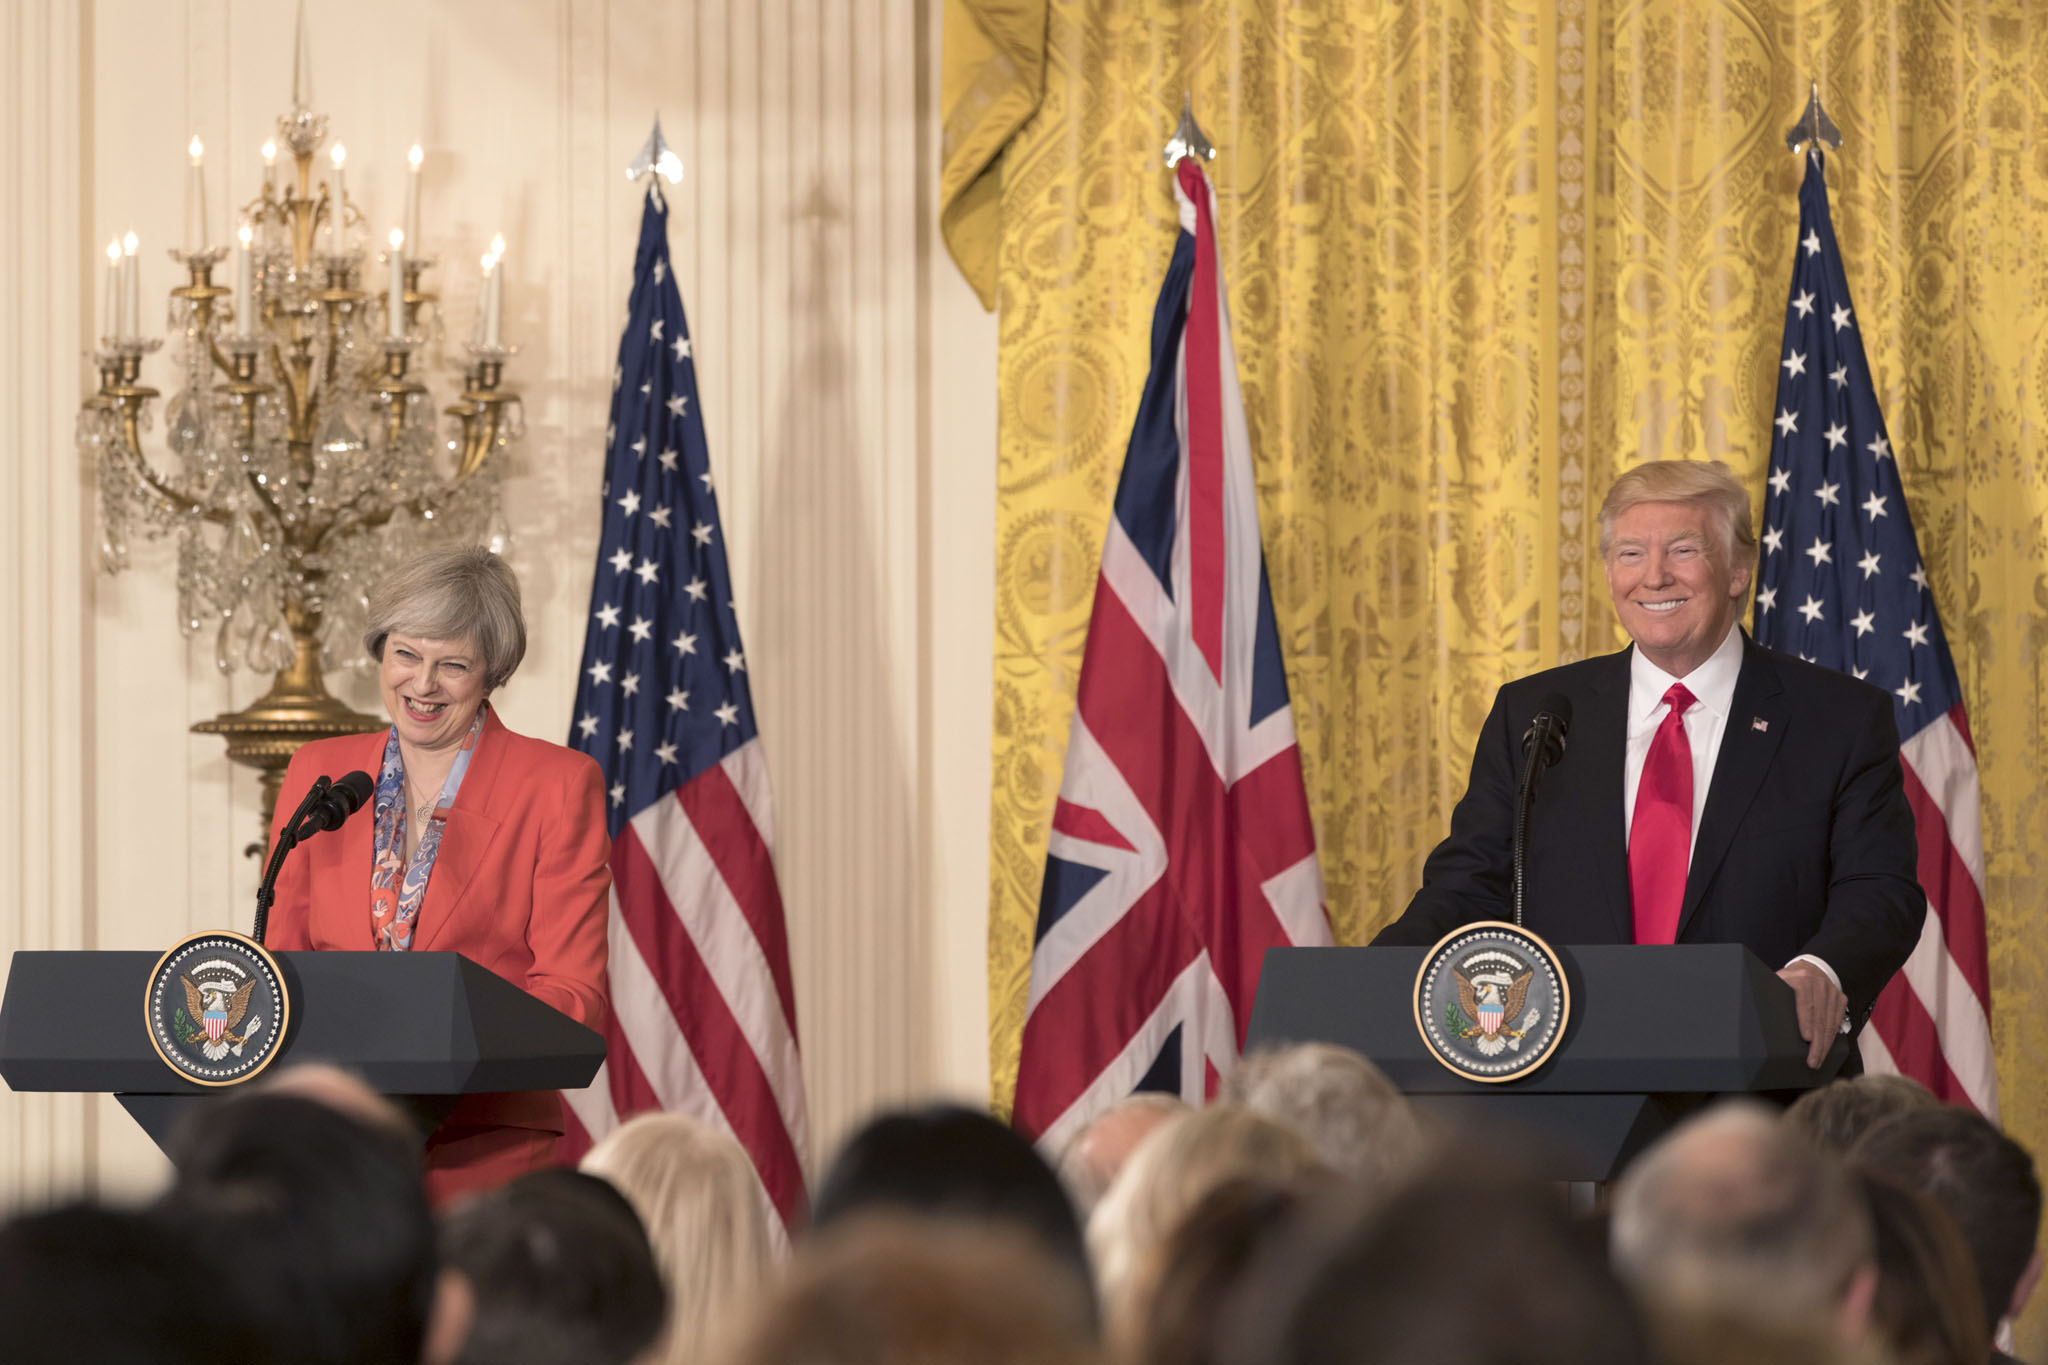 President Donald Trump and British Prime Minister Theresa May appear at a joint press conference, Friday, Jan. 27, 2017, in the East Room of the White House in Washington, D.C. (Official White House Photo by Shealah Craighead)